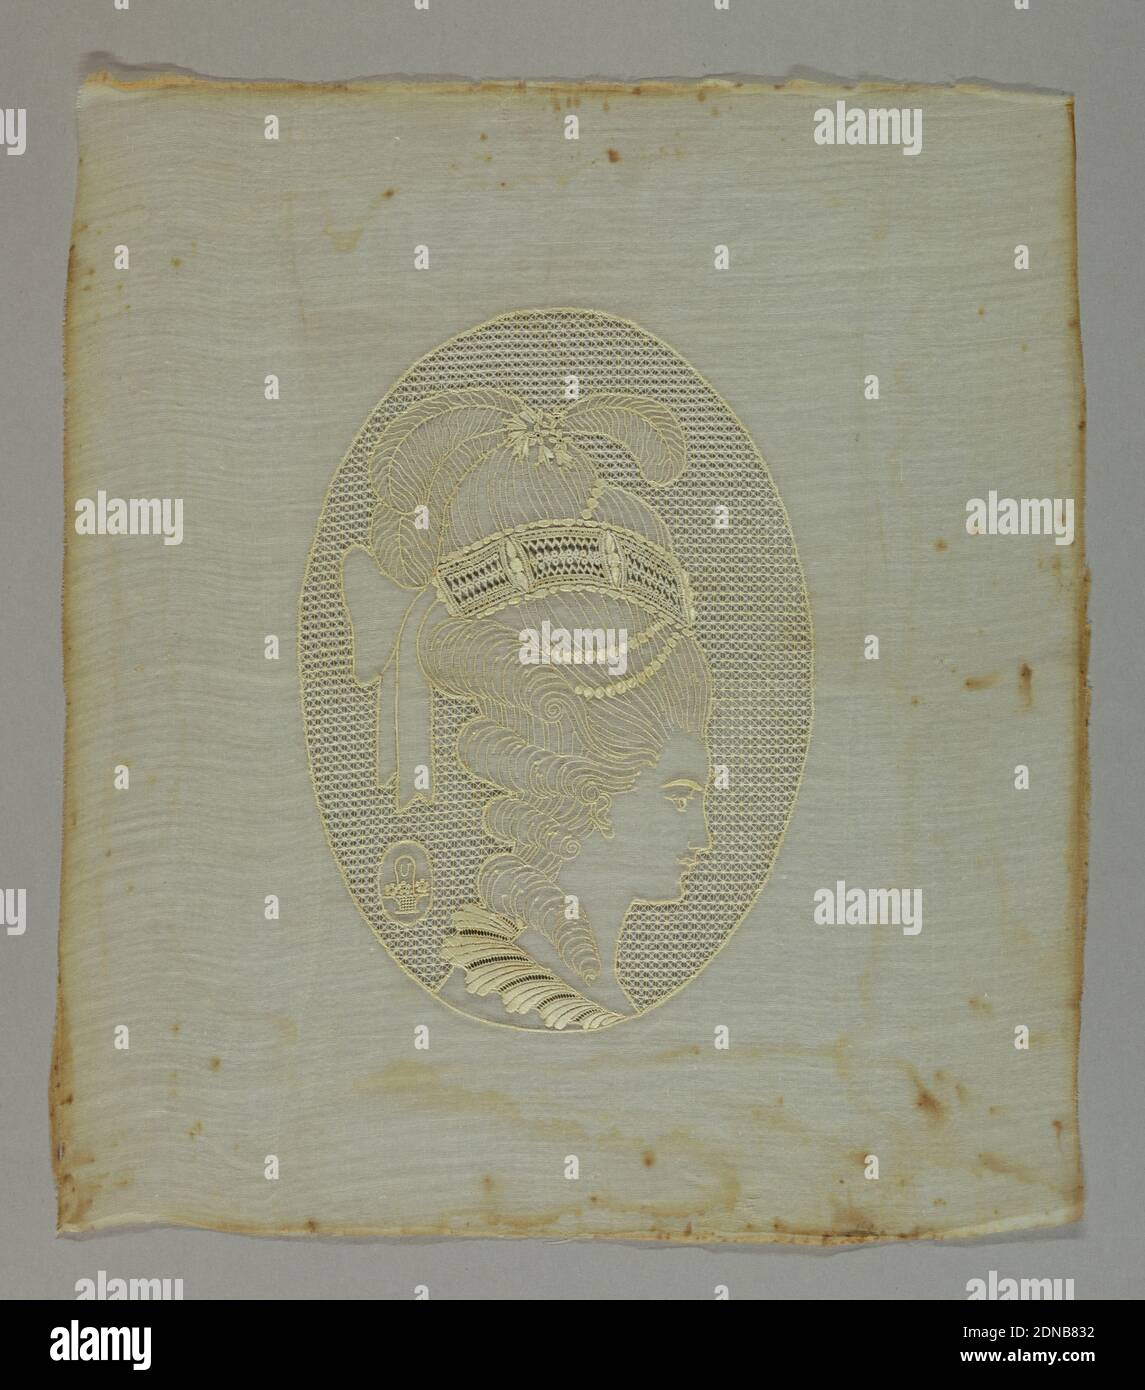 Medallion, Medium: cotton Technique: withdrawn element with embroidery, Embroidered portrait medallion of a woman in profile showing an elaborate powdered wig topped with pearl, plumes and a large bow. Maker's initial 'U' inside a small medallion containing a handled basket is on the bottom right., possibly France, possibly Germany, possibly USA, ca. 1915, embroidery & stitching, Medallion Stock Photo